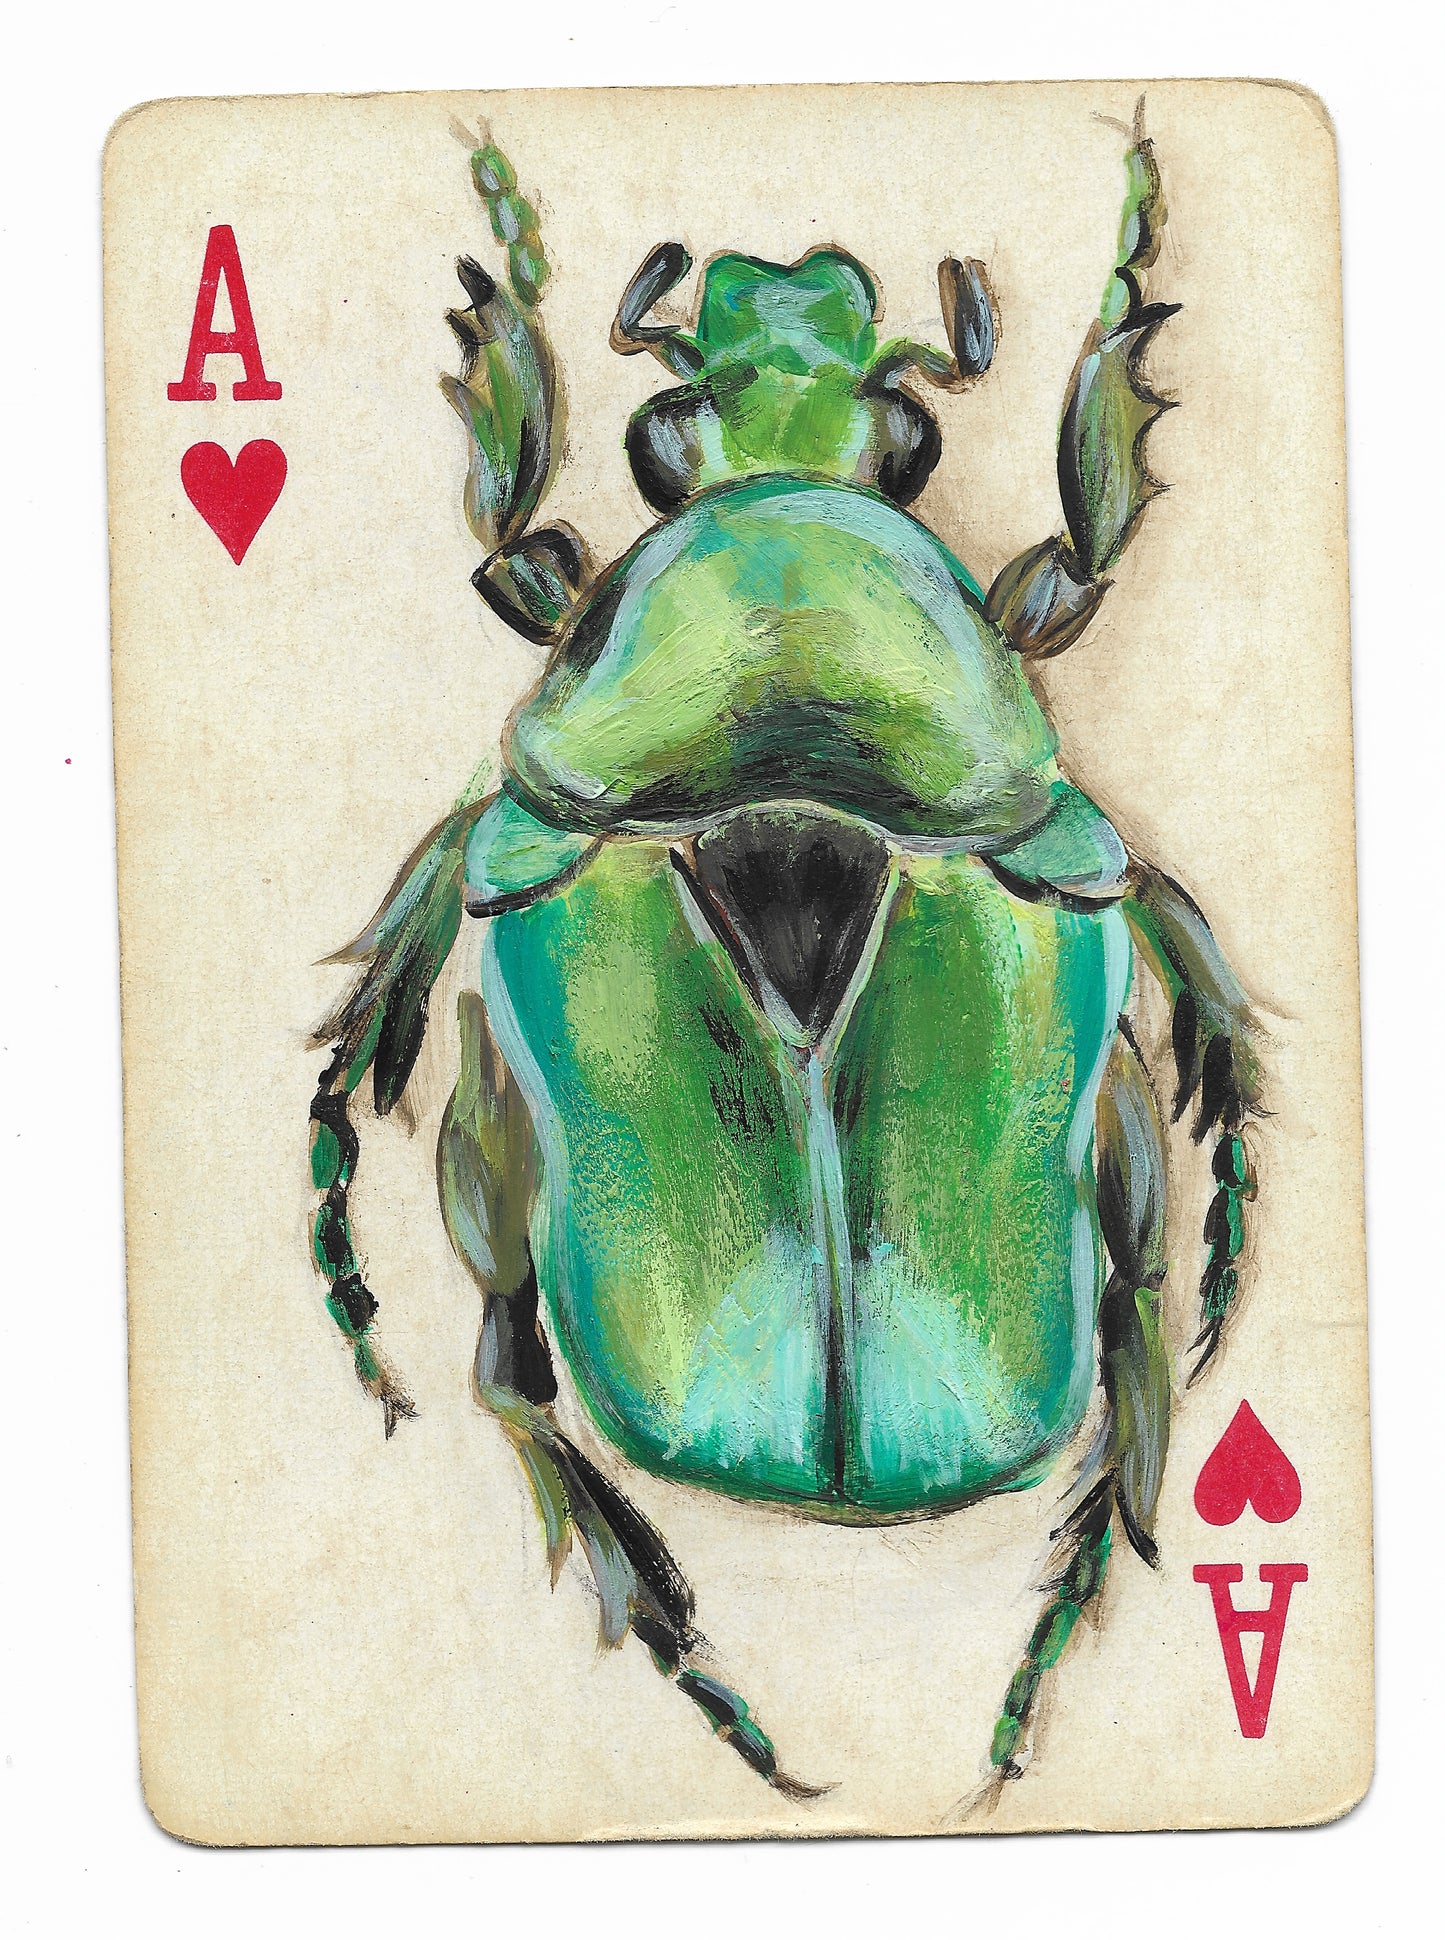 Fine Art Prints | Playing Card Paintings: Bugs